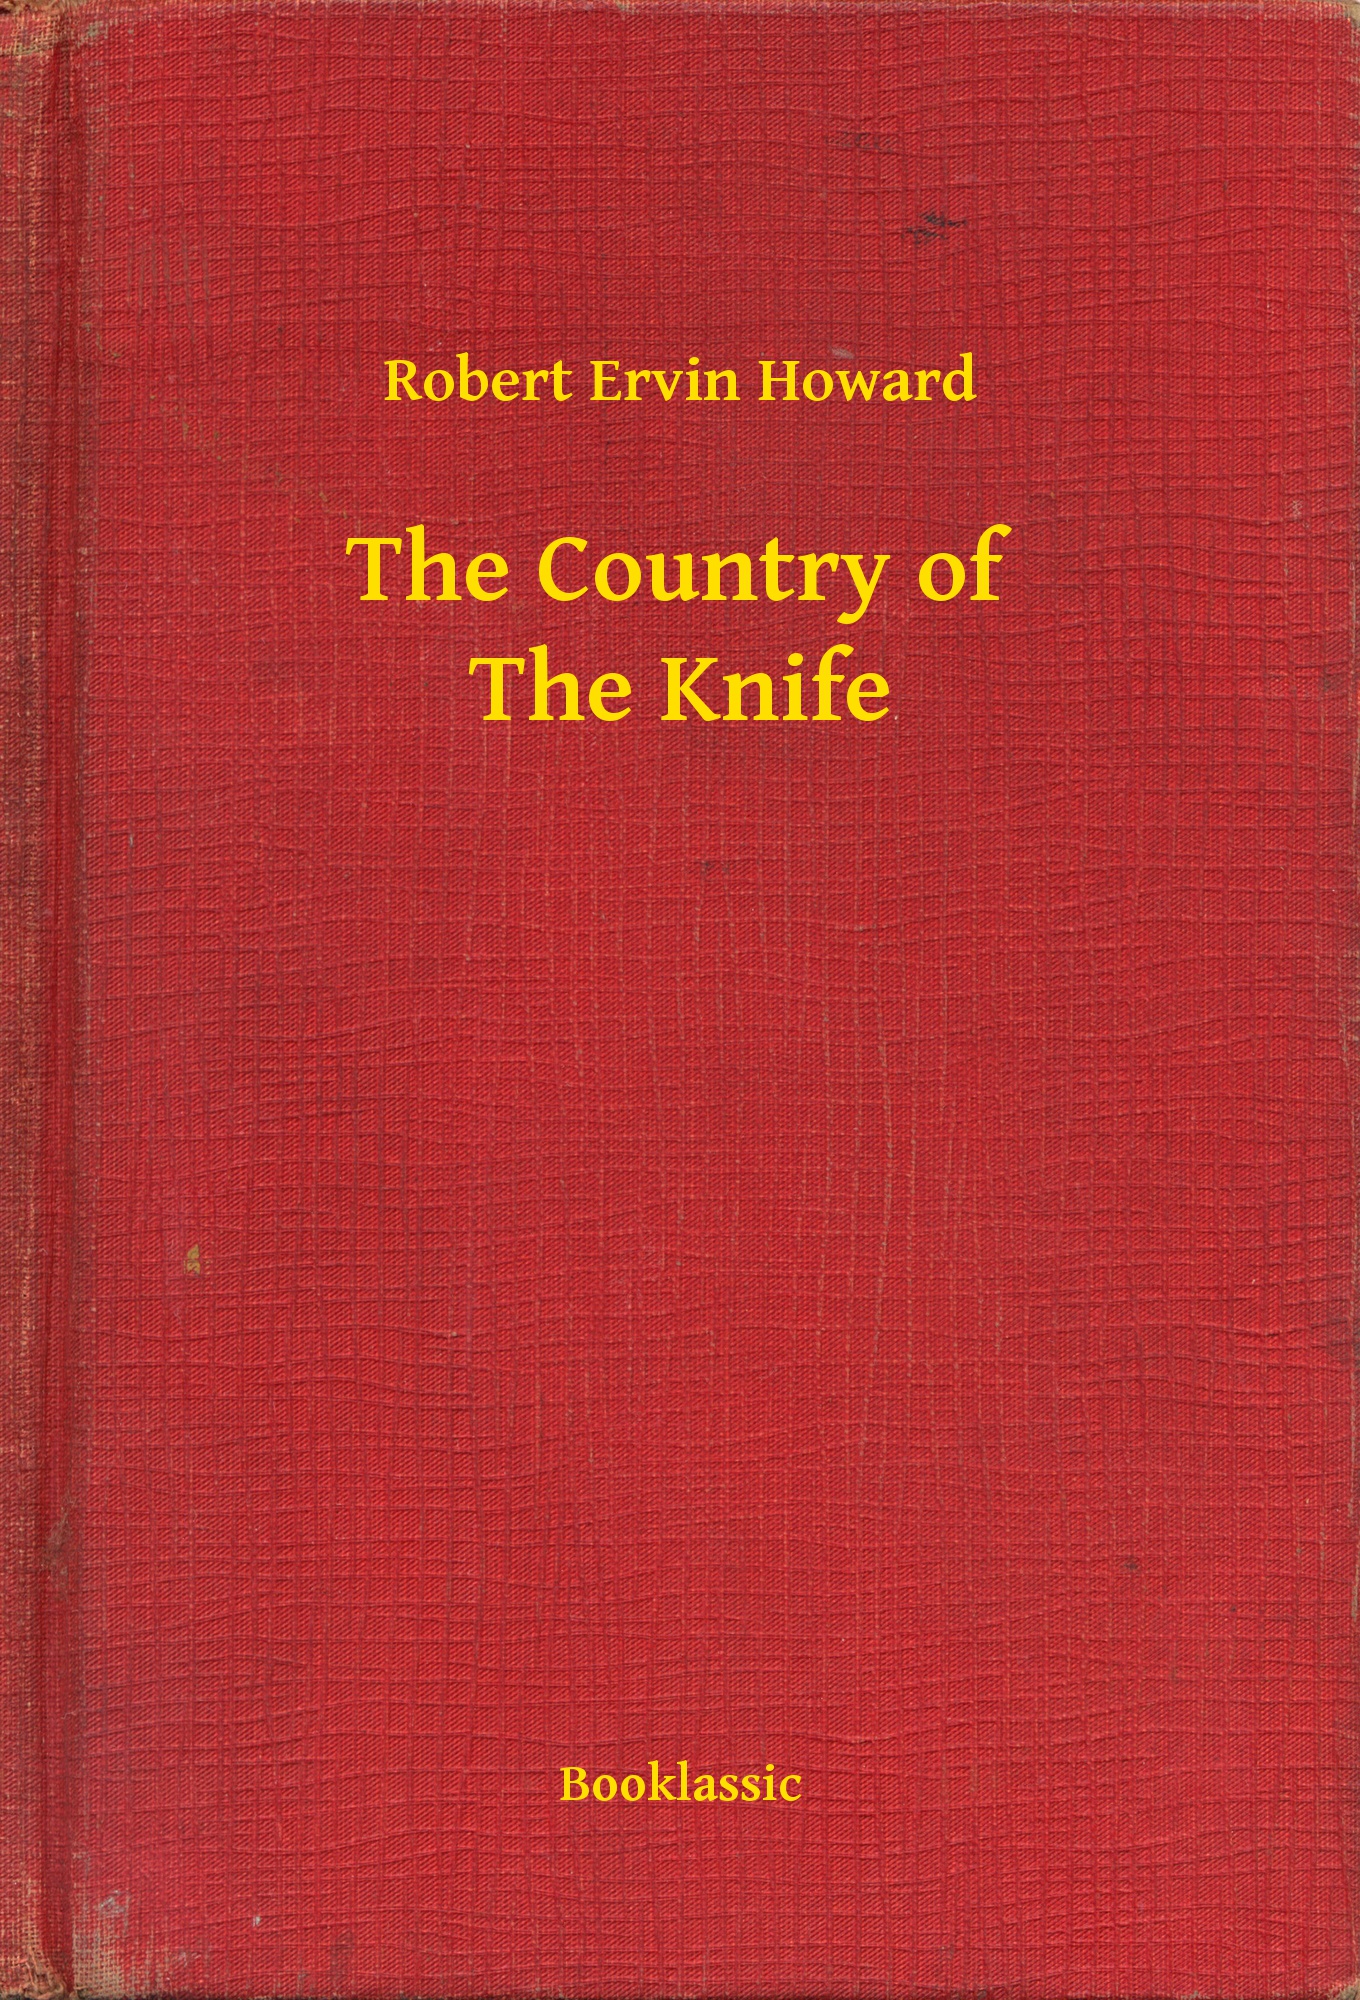 The Country of The Knife